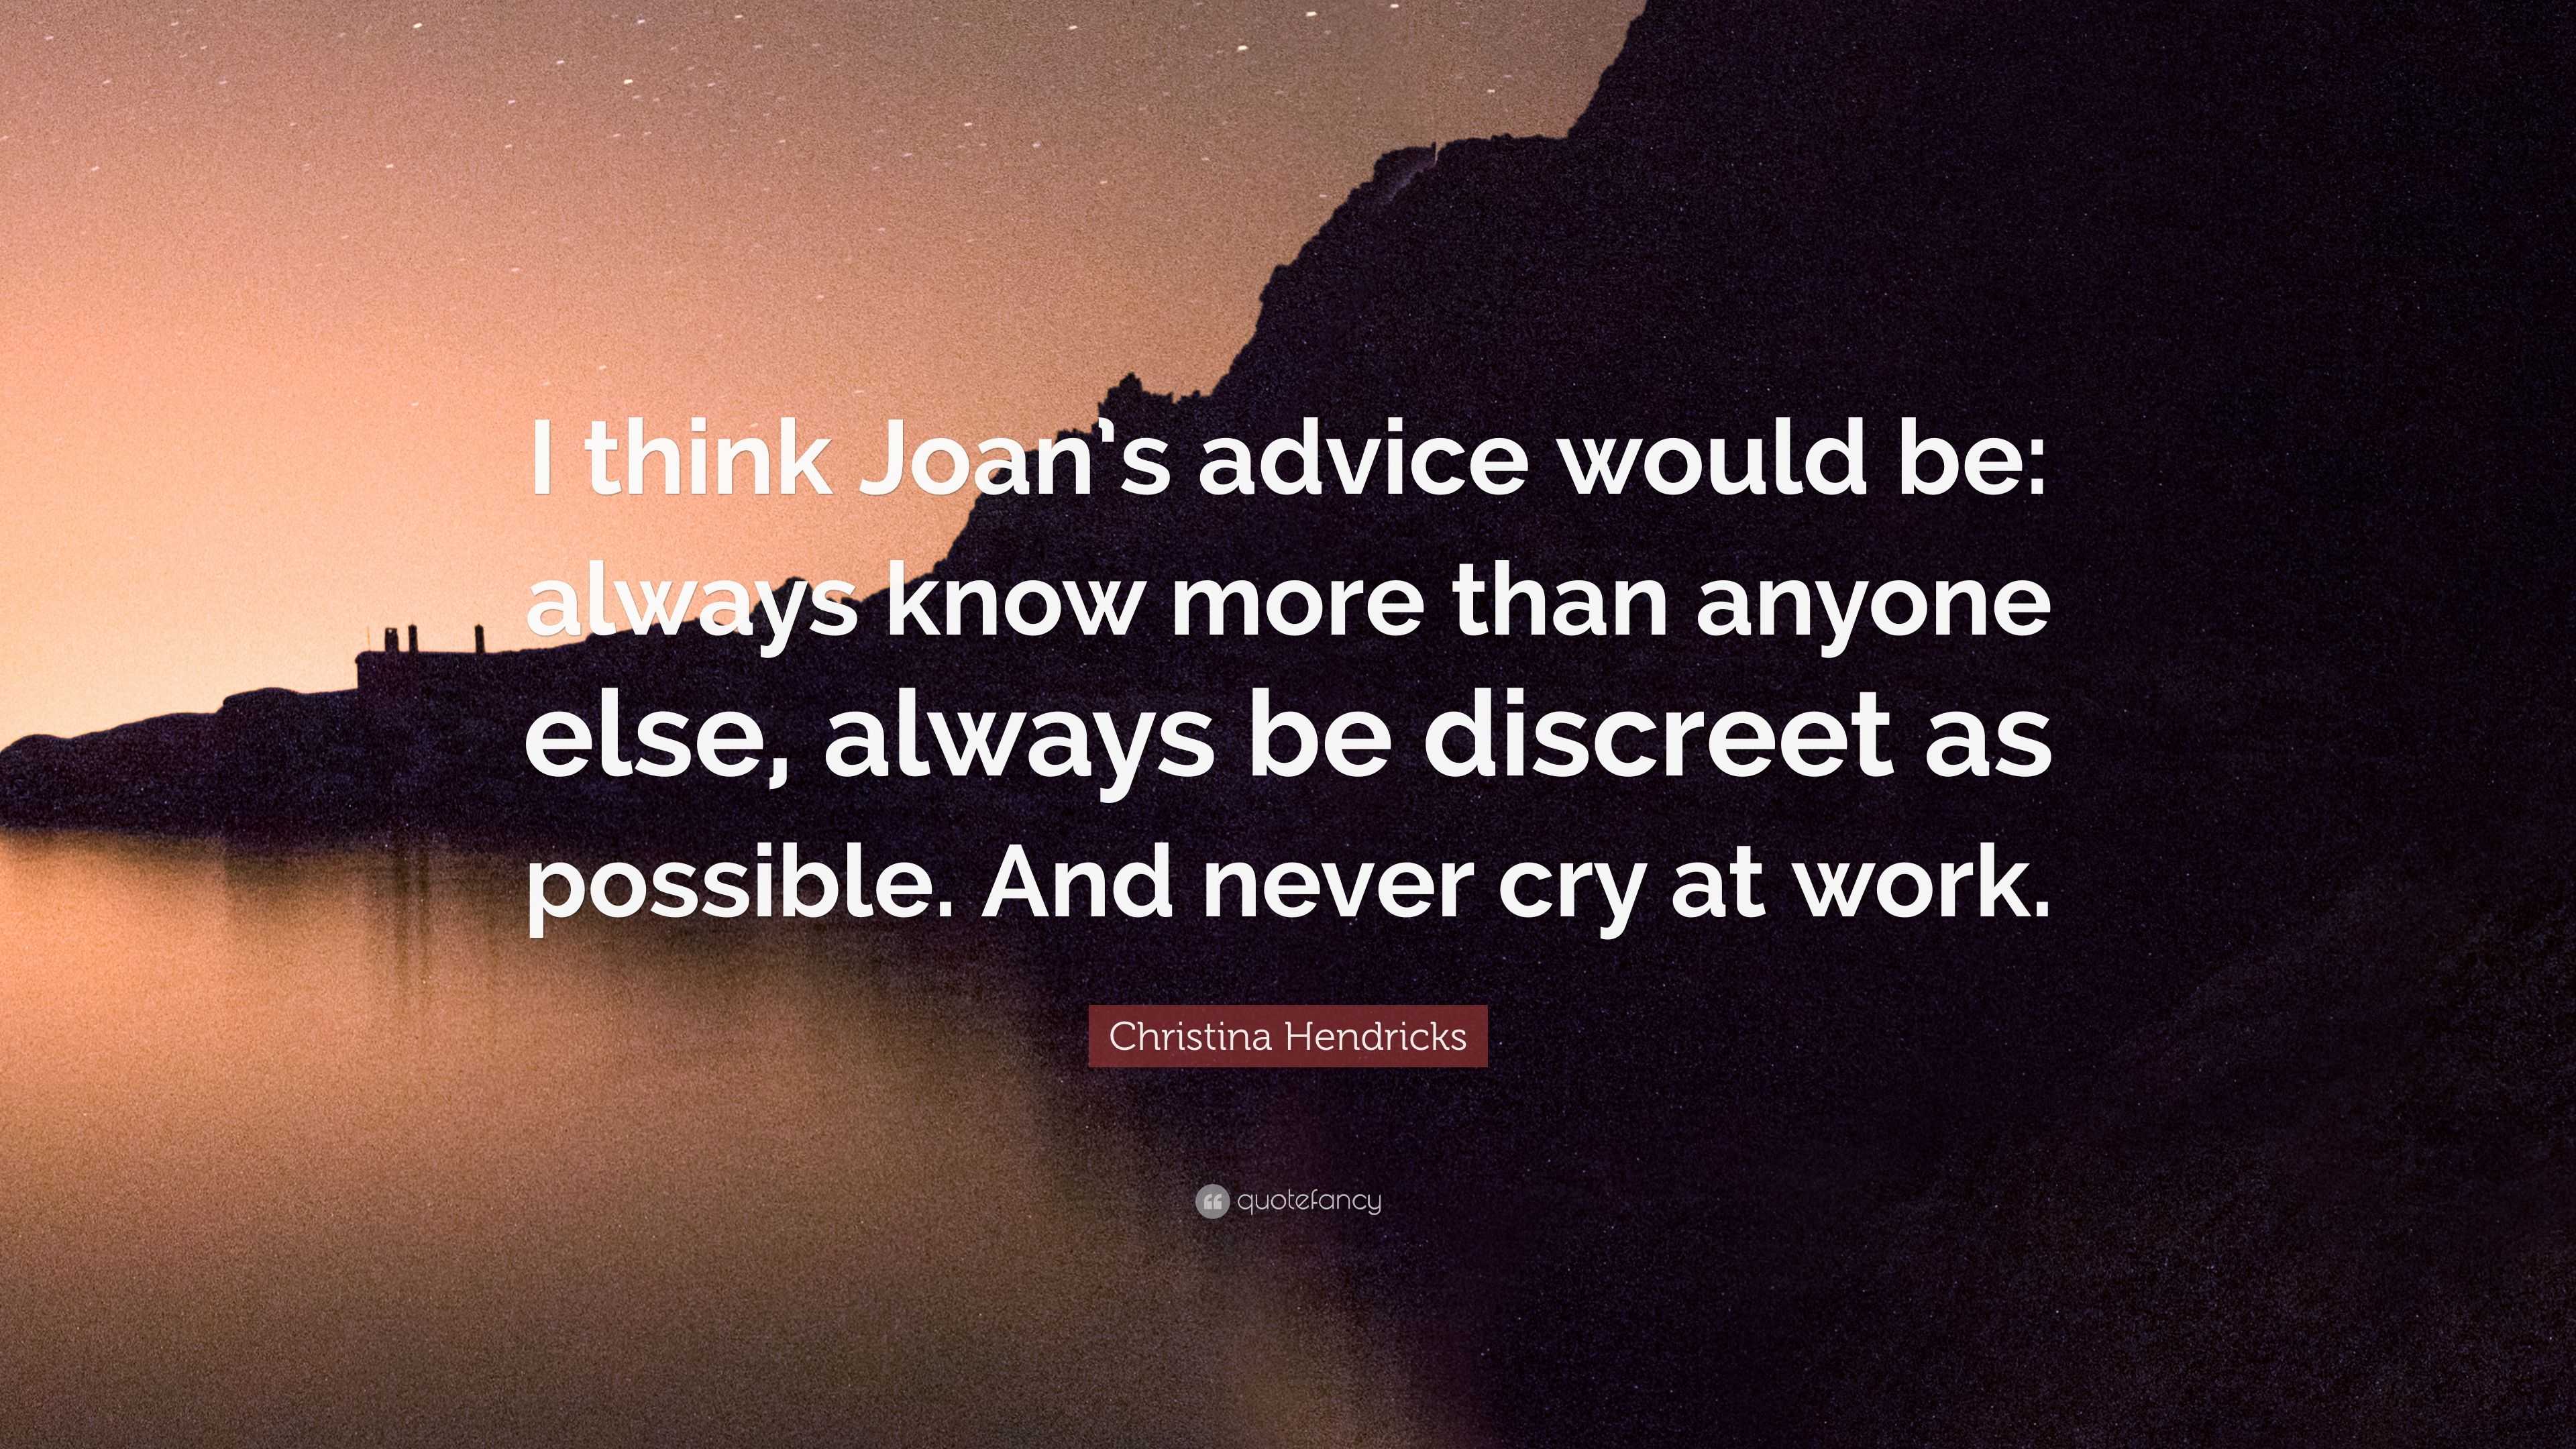 Christina Hendricks Quote: “I think Joan’s advice would be: always know ...